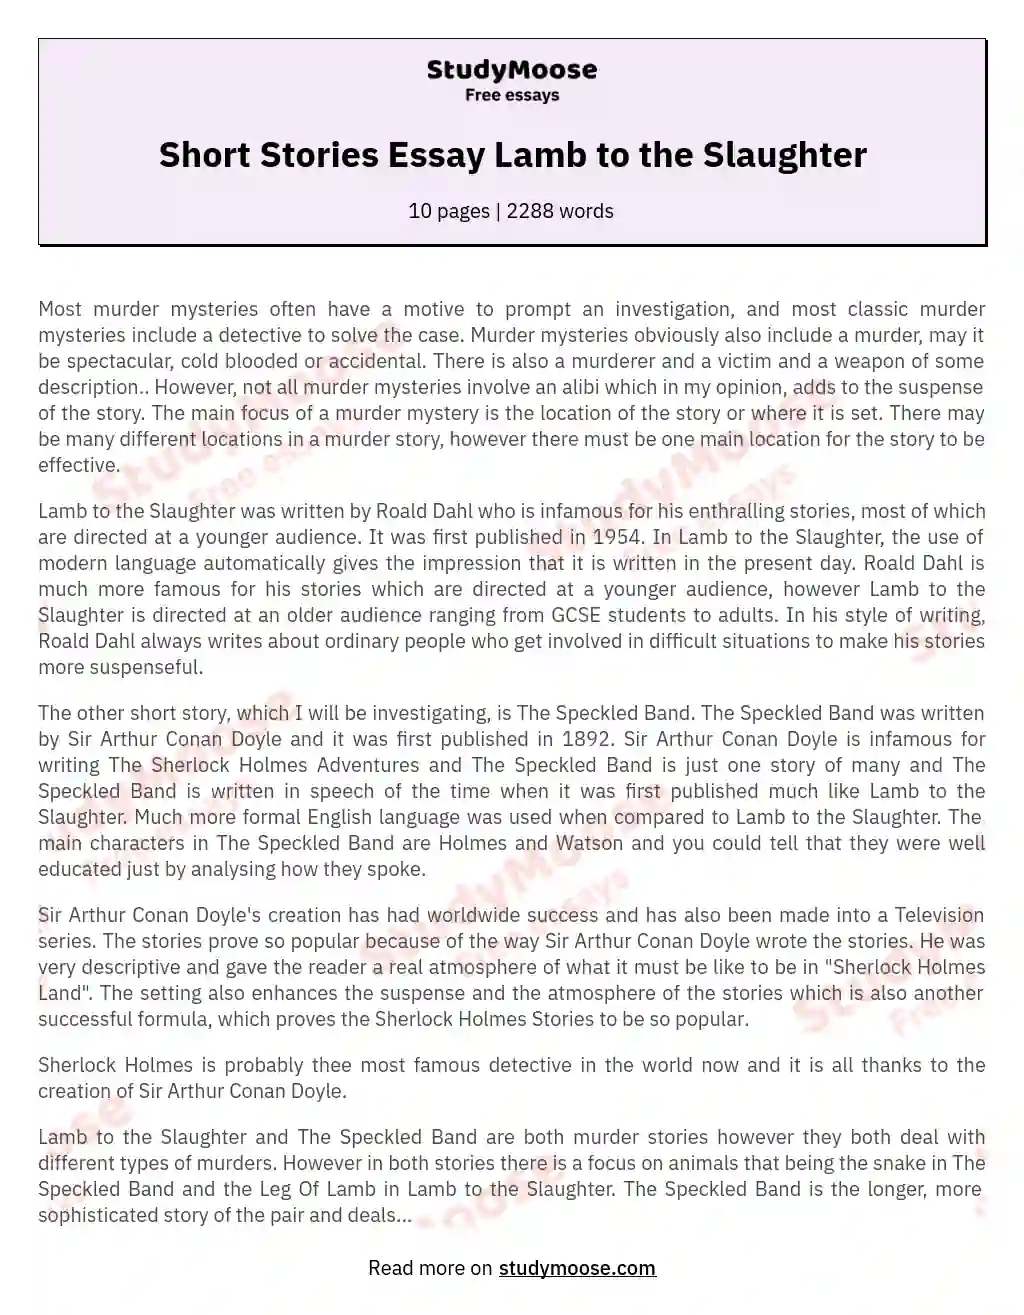 Short Stories Essay Lamb to the Slaughter